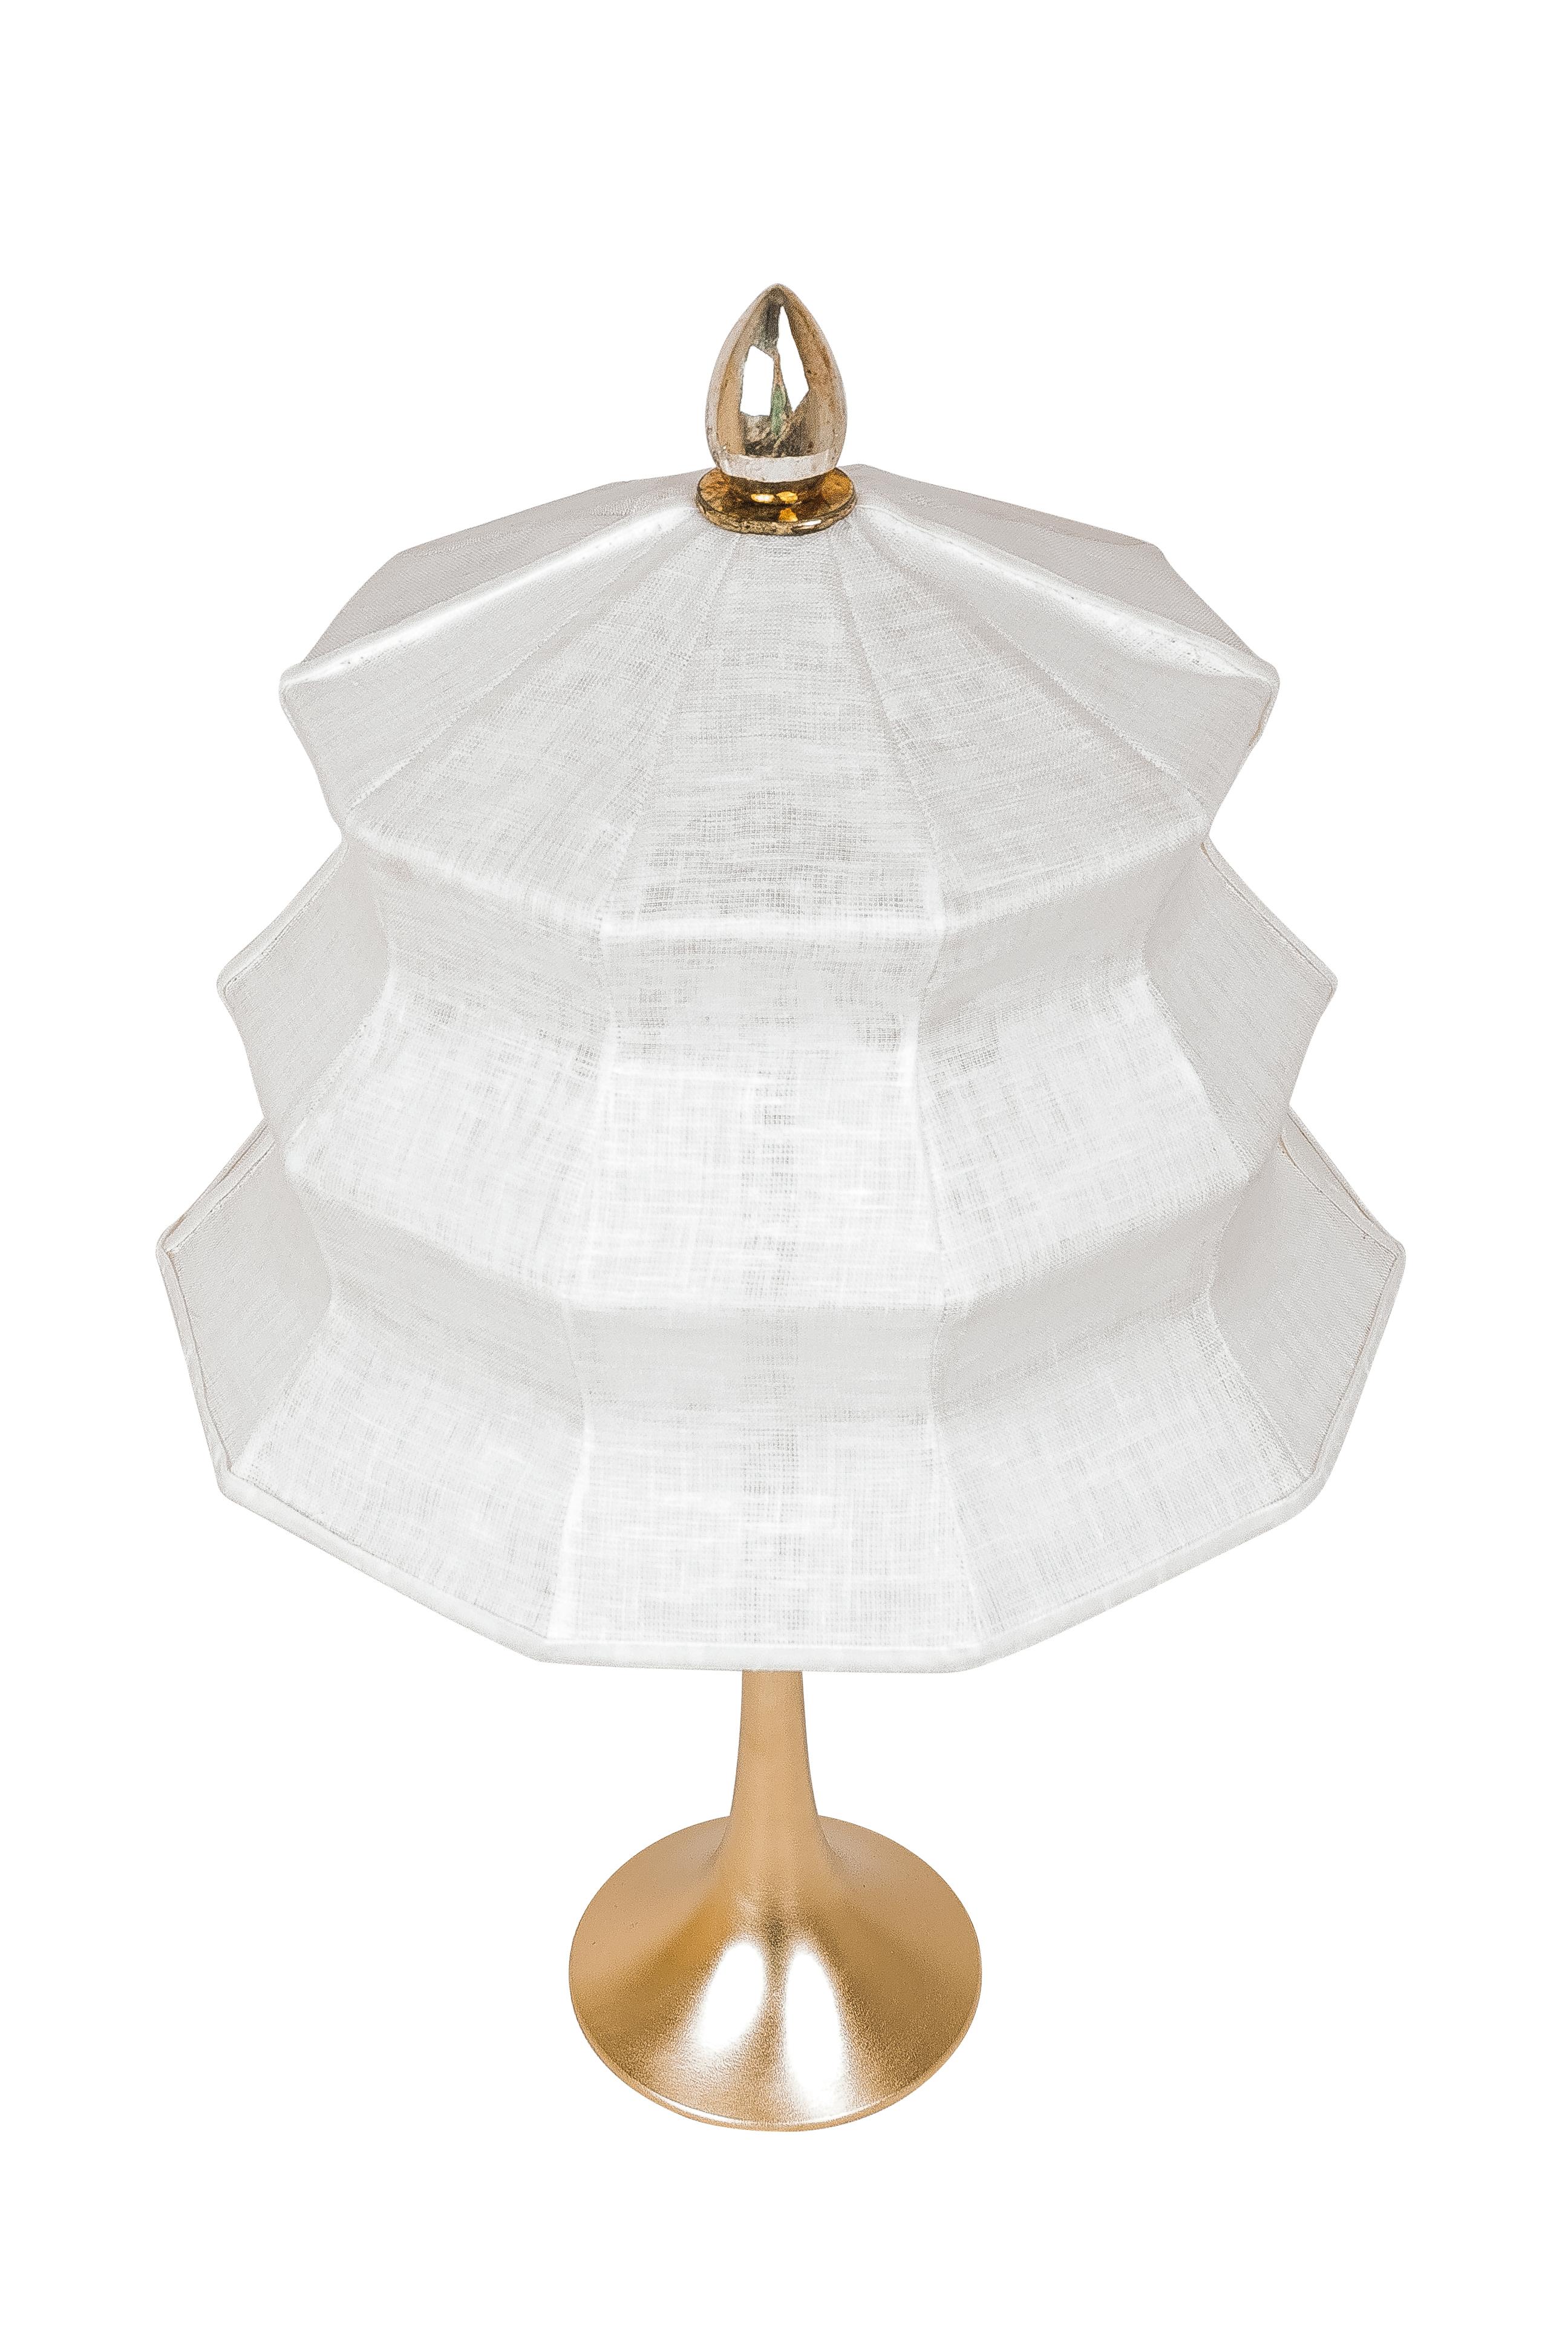 This table lamp is a contemporary piece, made entirely by hand in Tuscany Italy, 100% of Italian origin. 

Inspired by the eastern Pagoda temple, Sabrina masterfully combines the geometric lines of the lampshade with the smooth, sinuous curve of the